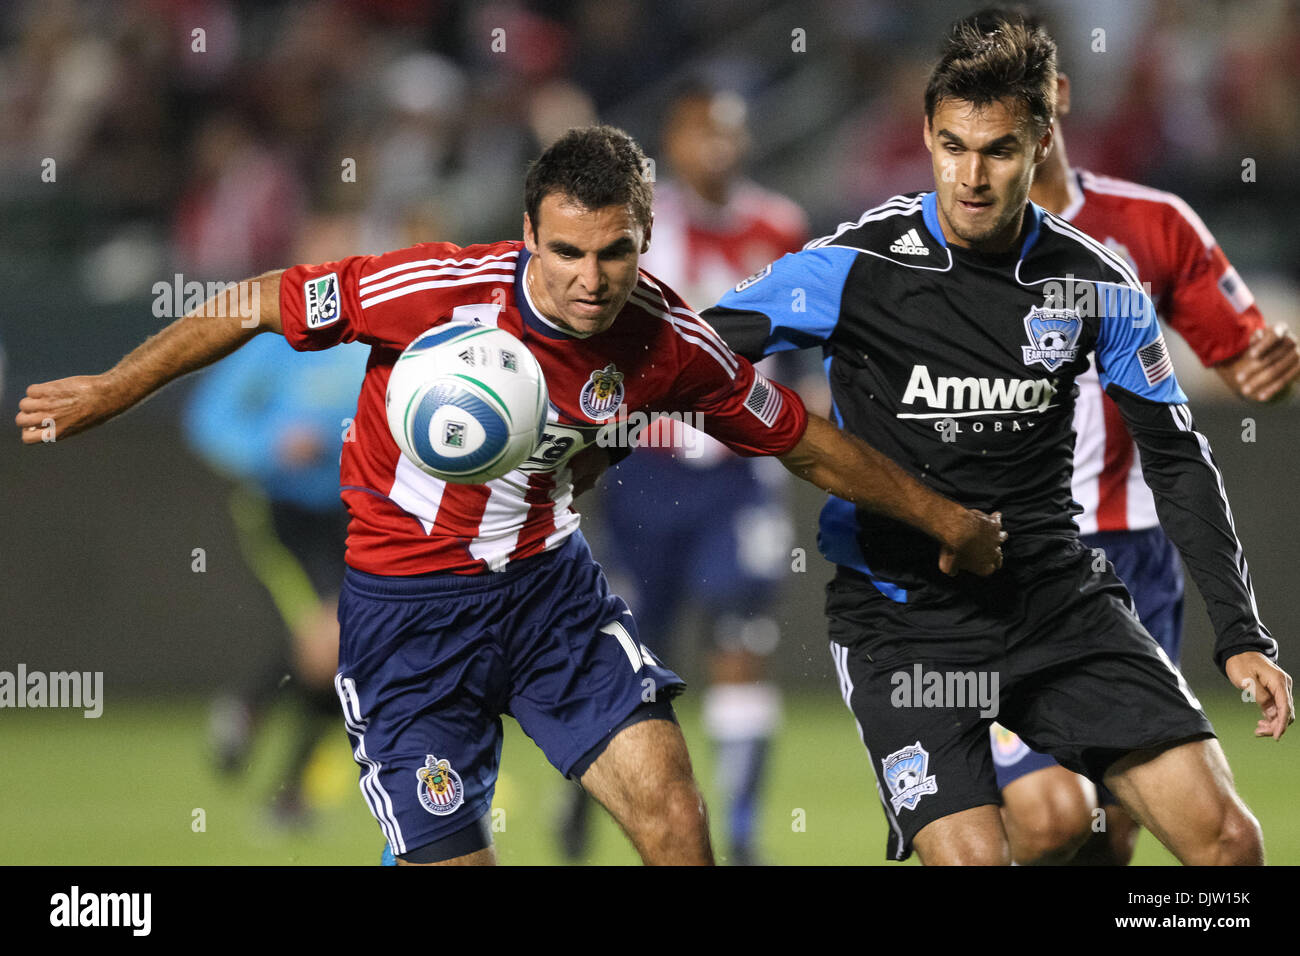 24 April 2010: Chivas USA defenseman #13 Jonathan Bornstein (L) and San Jose Earthquake forward #8 Chris Wondolowski (R) fight for the ball during the Chivas USA vs the San Jose Earthquakes game at the Home Depot Center in Carson, California. Chivas went on to defeat the Earthquakes with a final score of 3-2. Mandatory Credit: Brandon Parry / Southcreek Global (Credit Image: © Bran Stock Photo